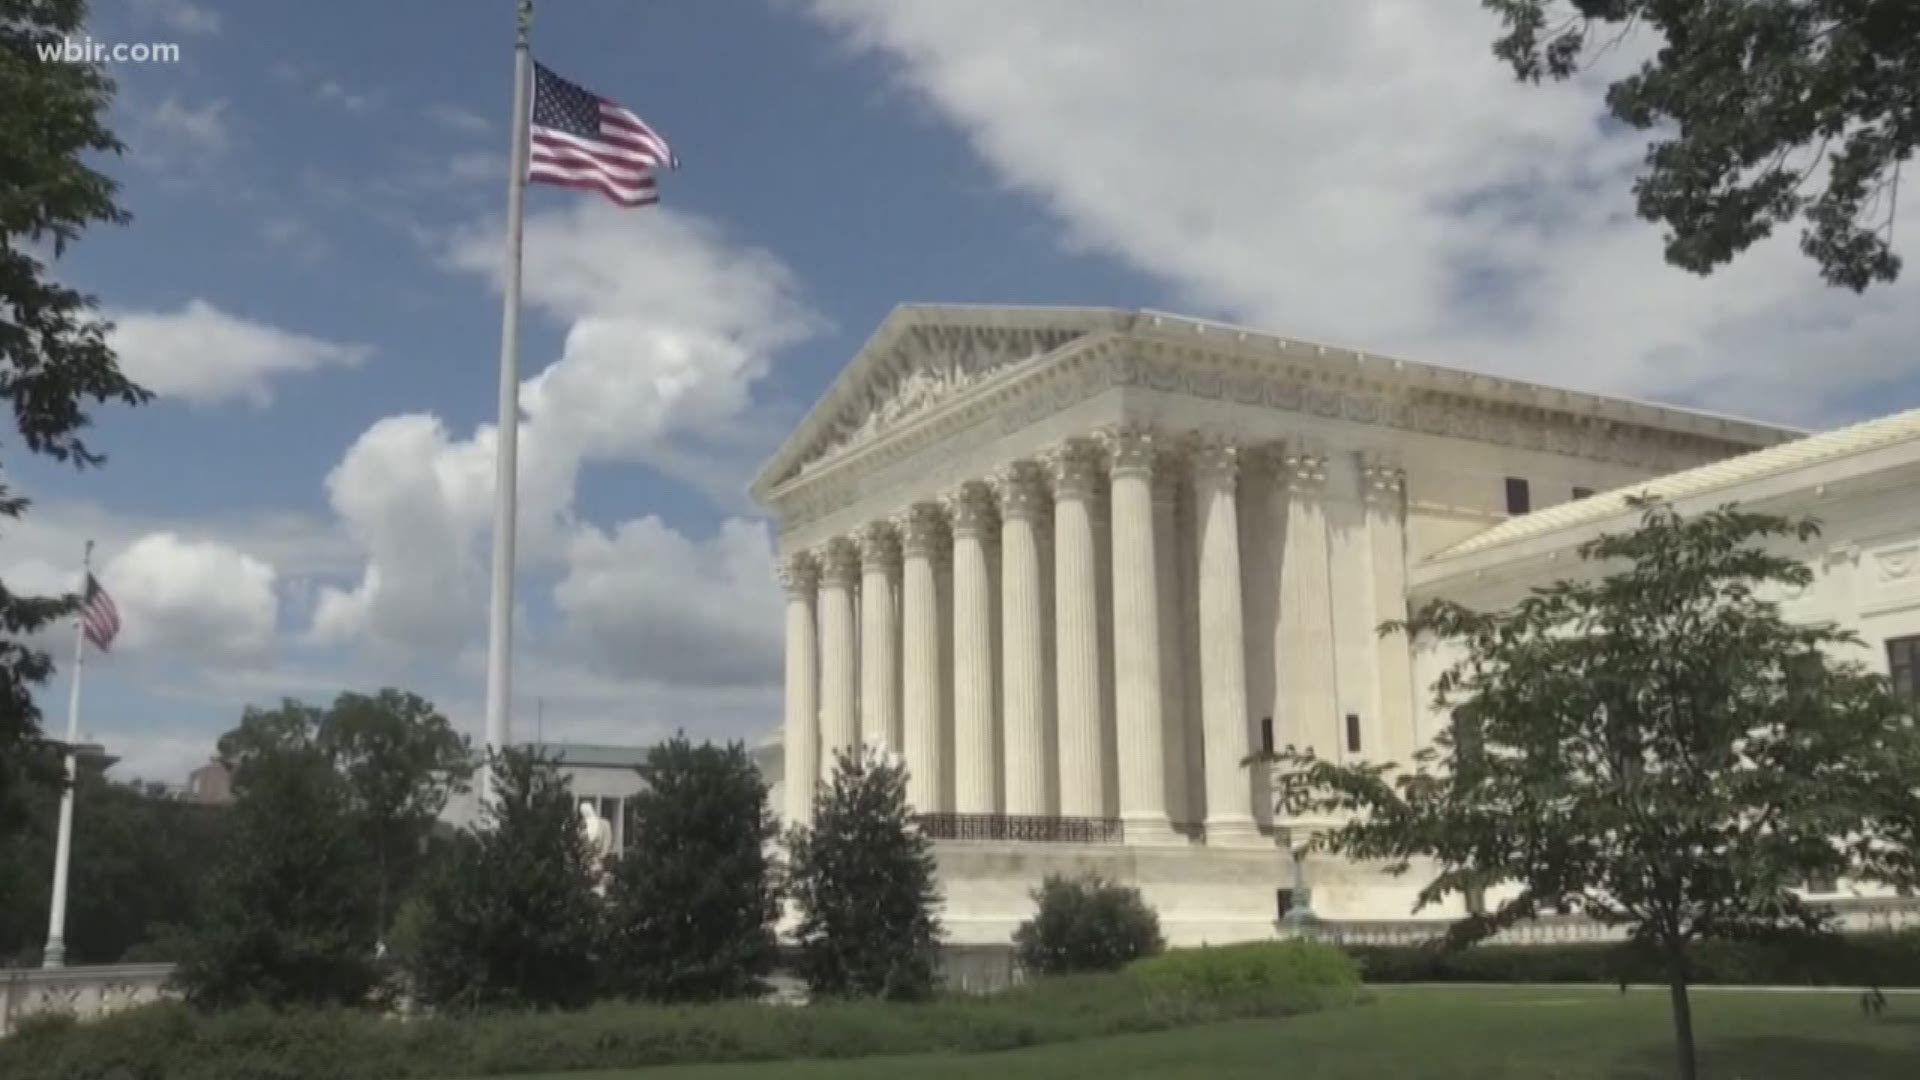 The U.S. Supreme Court is blocking the use of the citizenship question on the 2020 census---for now. It also ruled 5 to 4 today that claims of gerrymandering do not belong in federal courts.